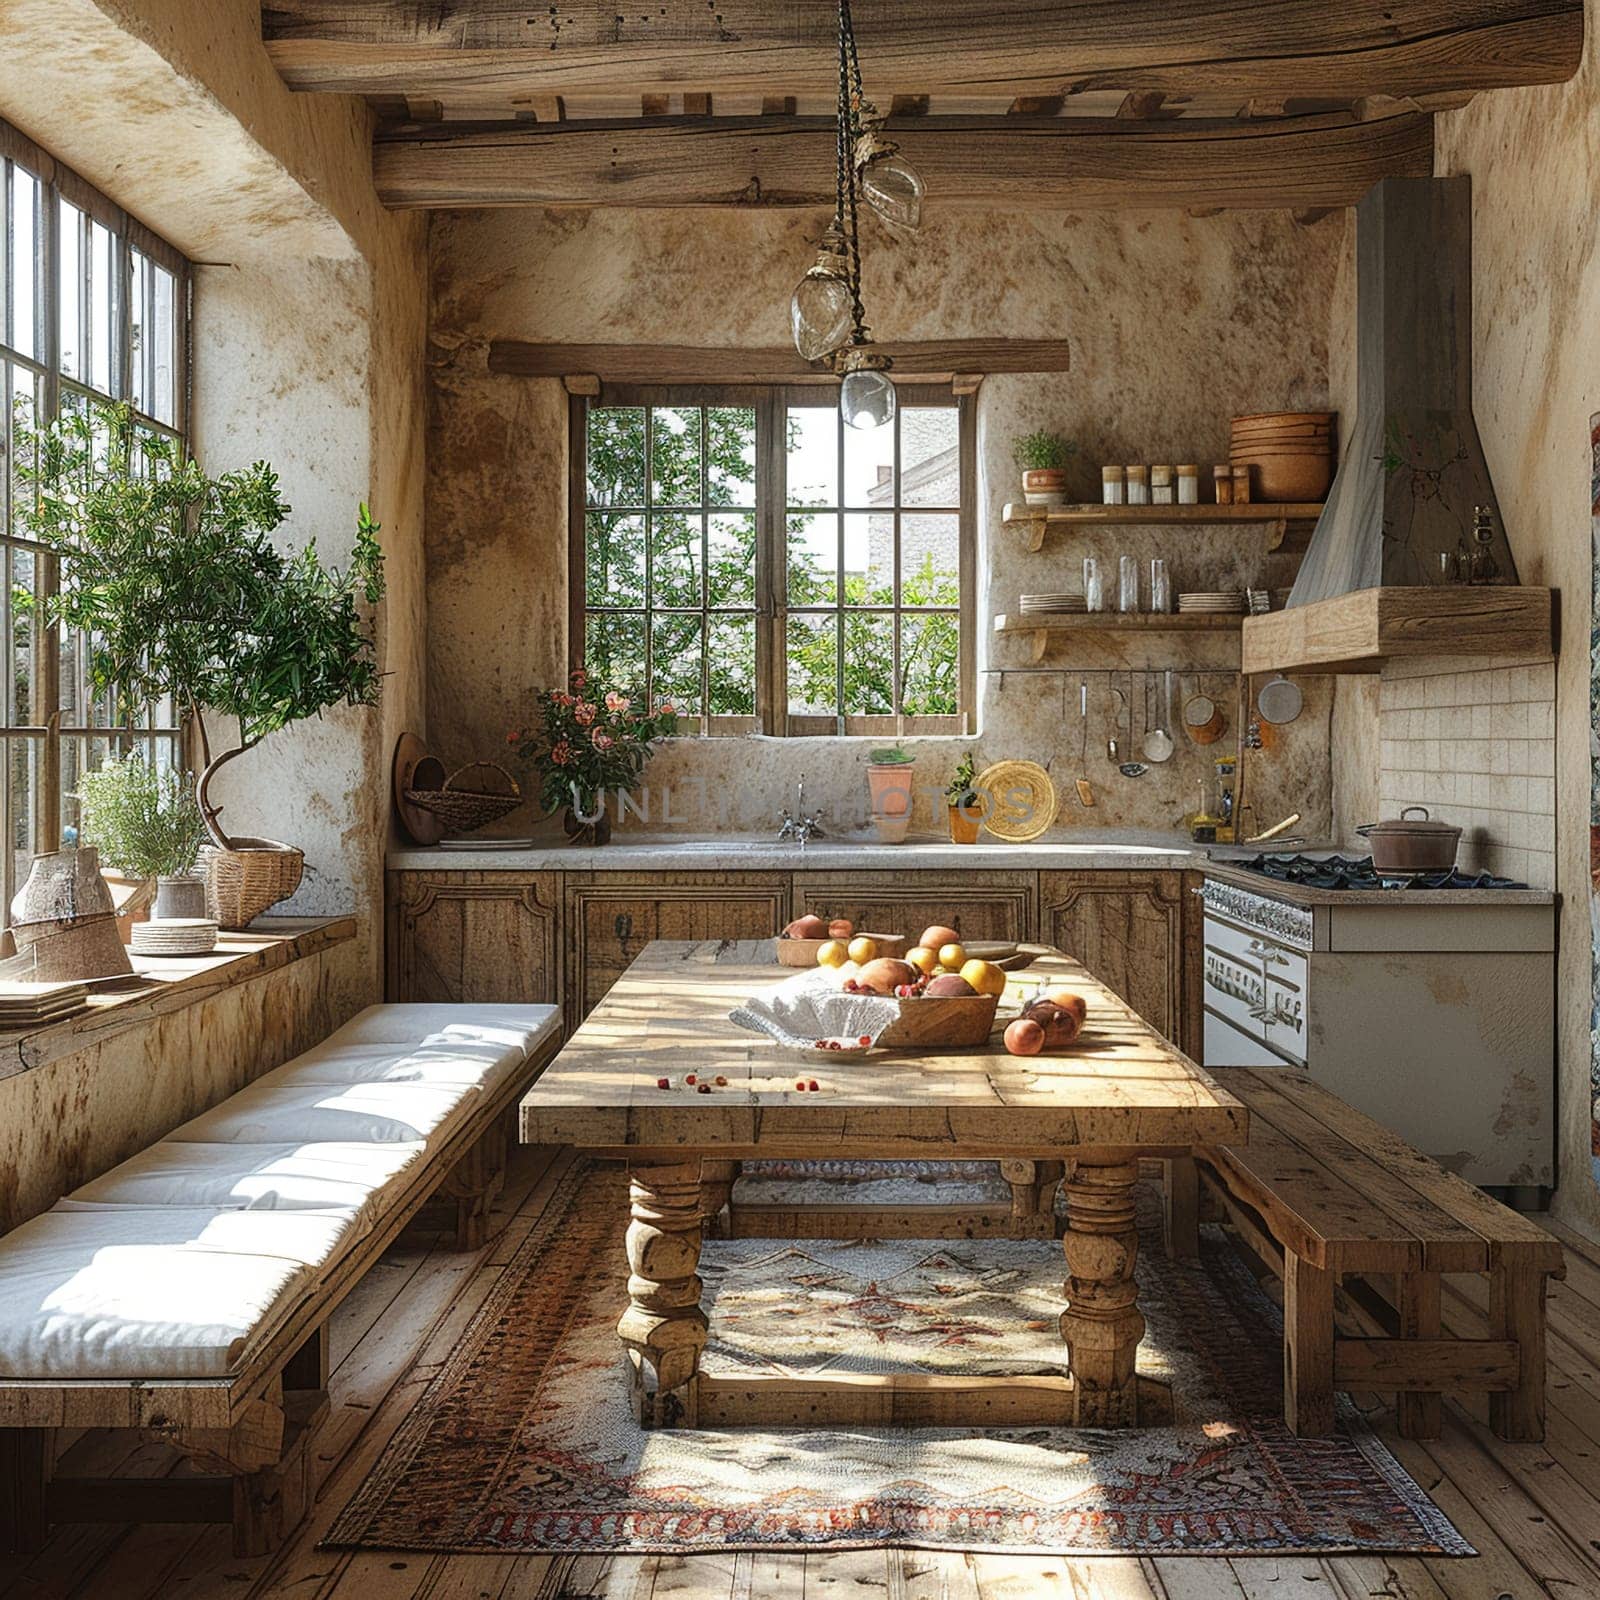 Rustic farmhouse kitchen with a large wooden table and antique fixtures3D render by Benzoix